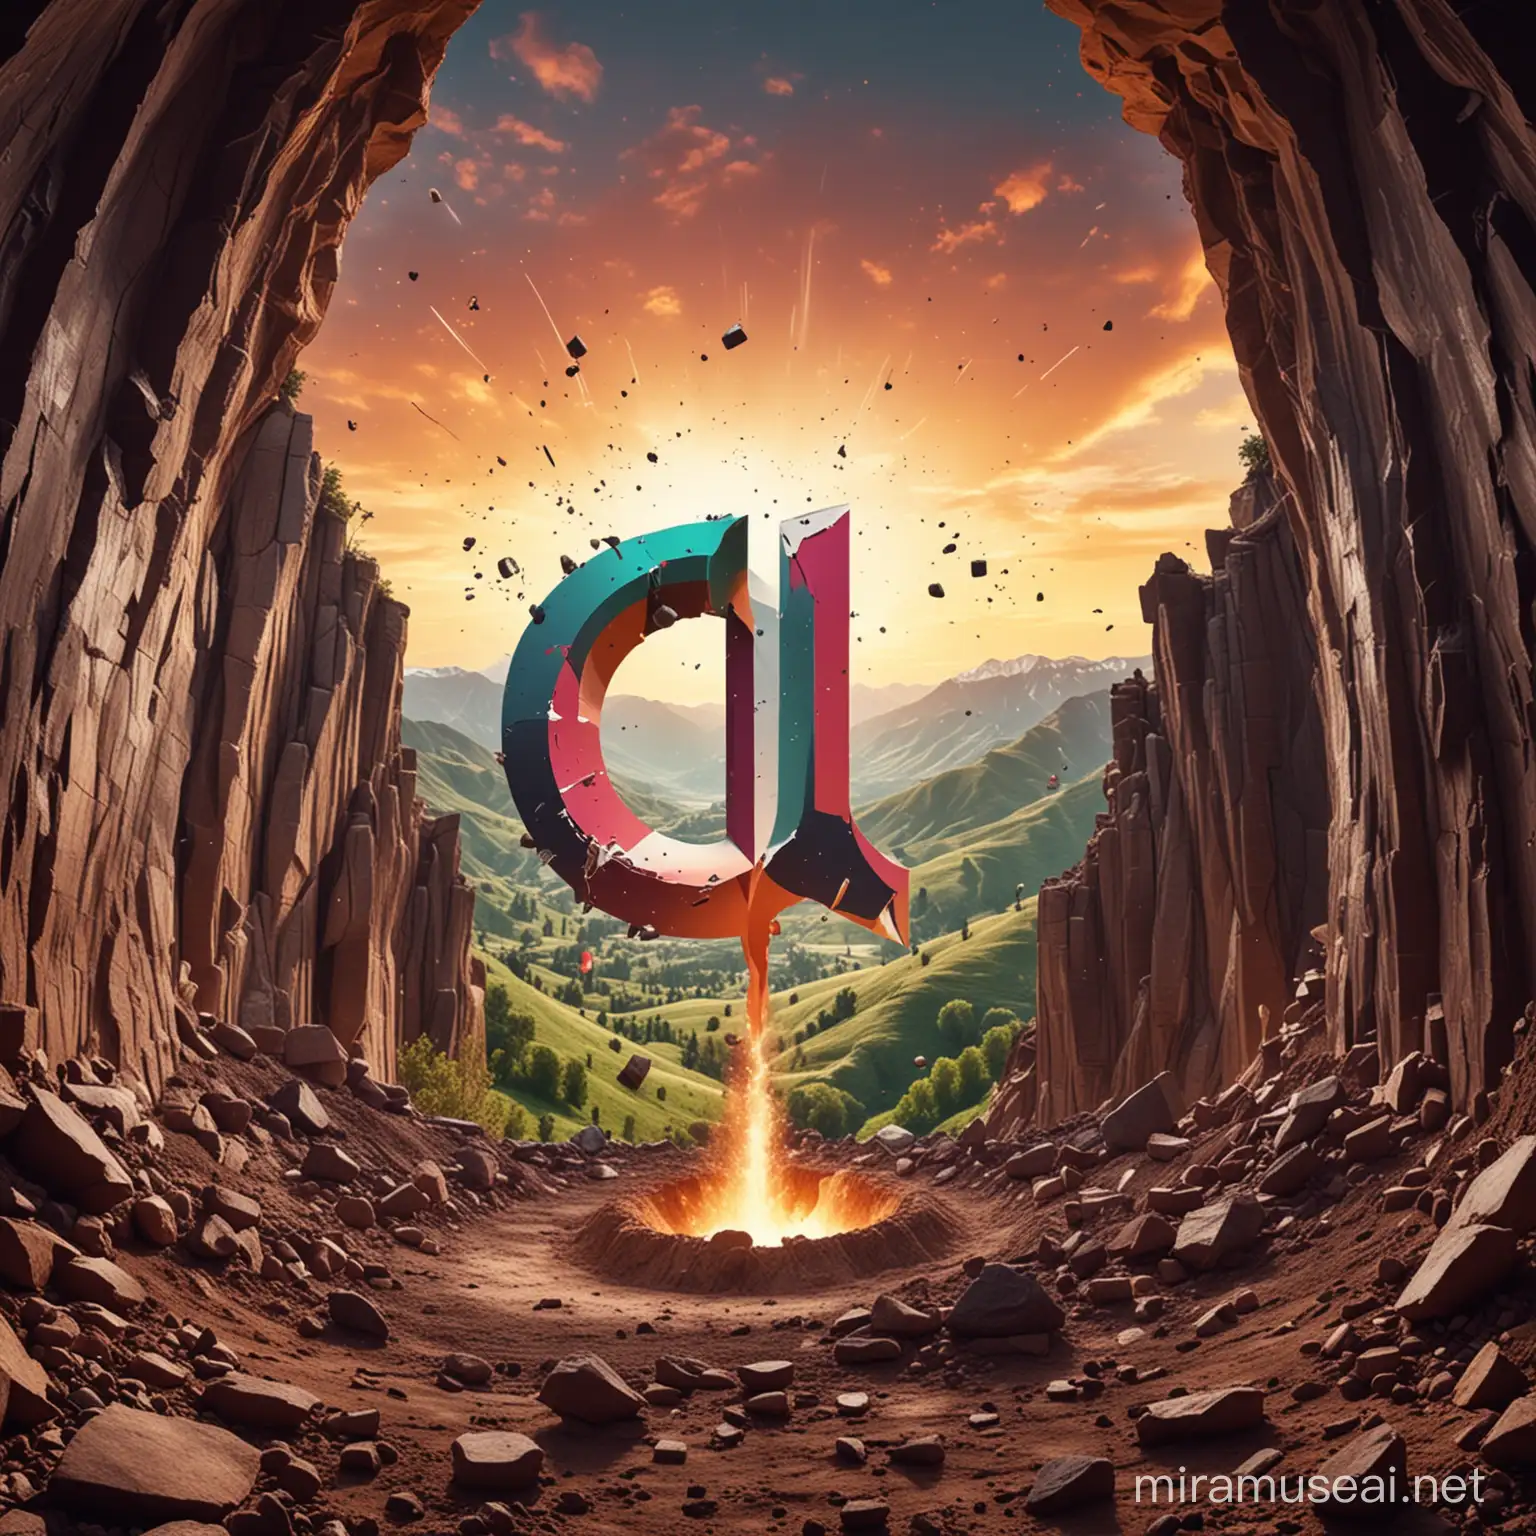 make tiktok logo coming out from a hole in the valley rising to the top with explosion effect behind and around the logo